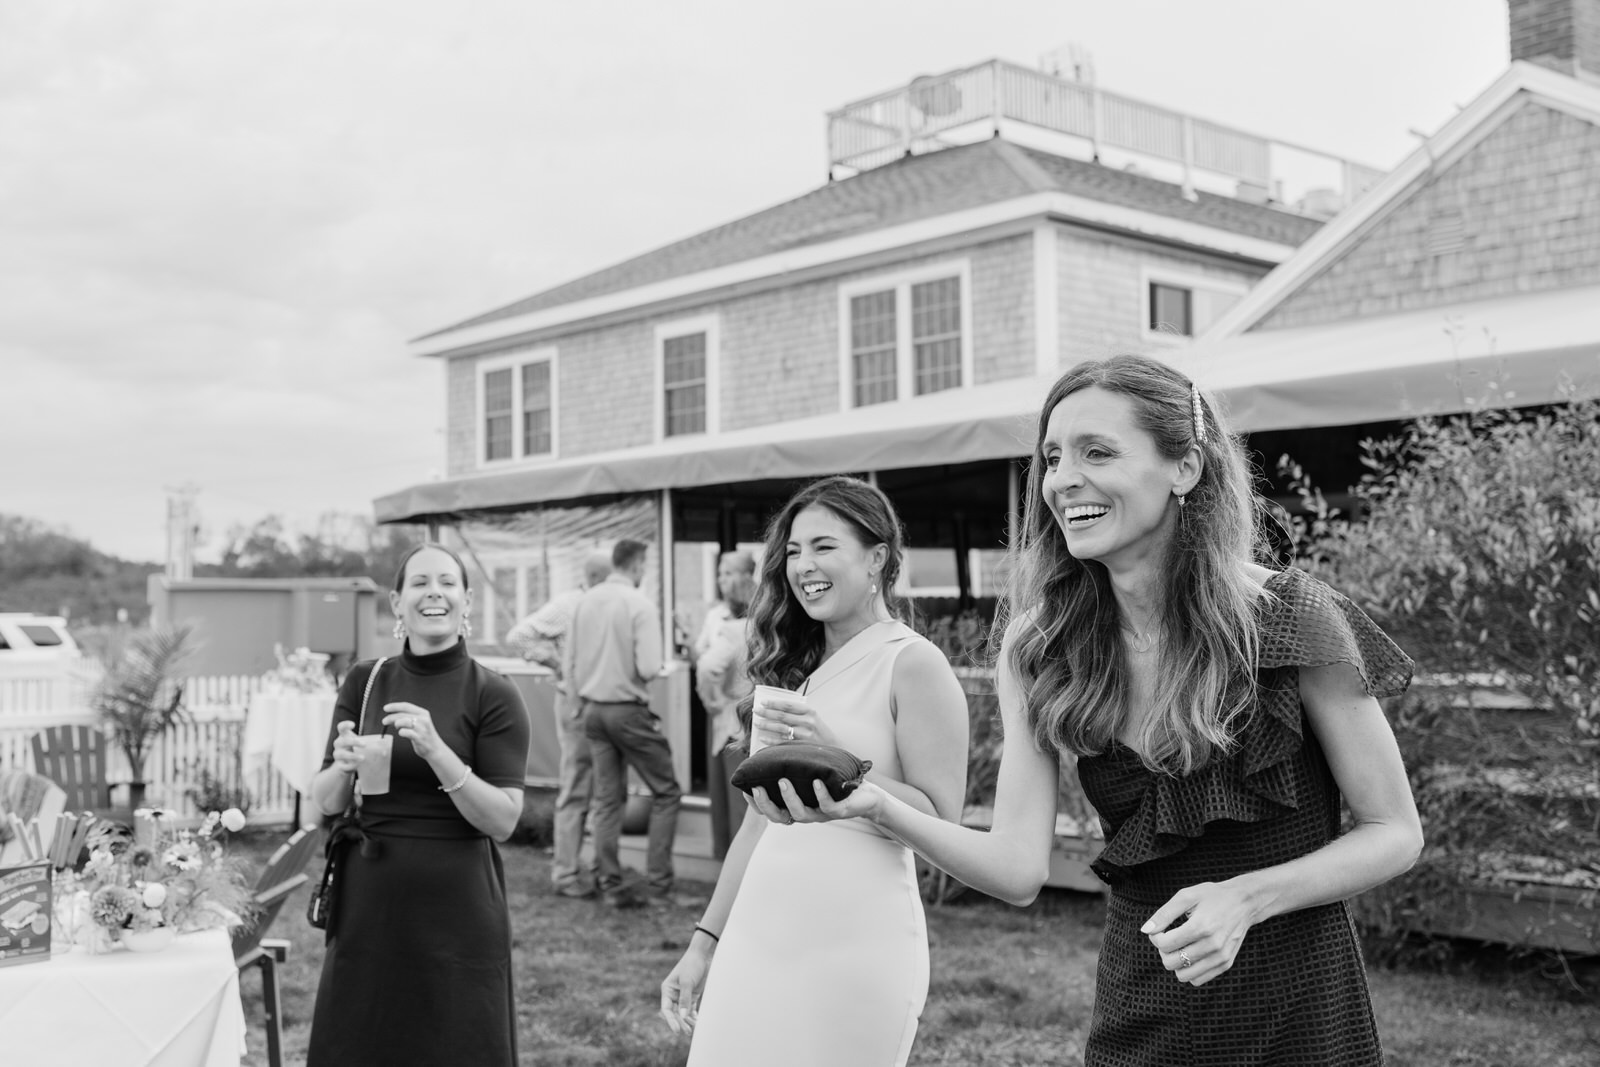 guests throwing bean bags during cocktail at a wedding on block Island.